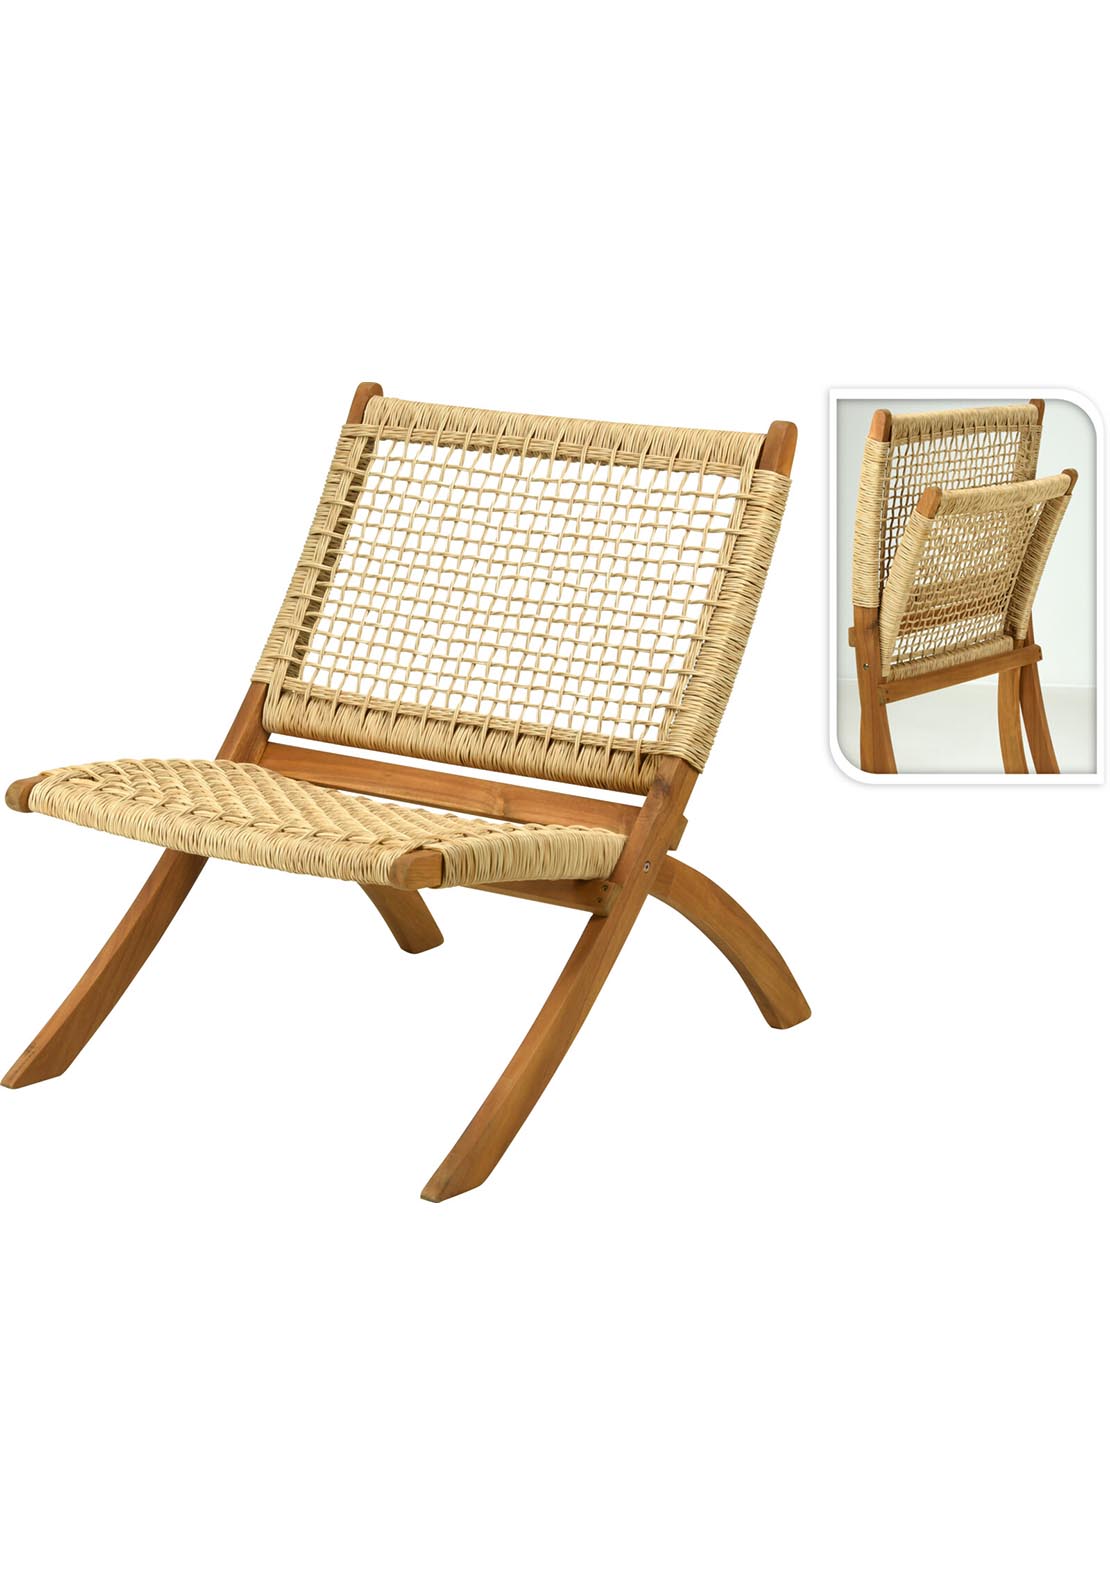 The Home Garden Folding Relax Chair 1 Shaws Department Stores